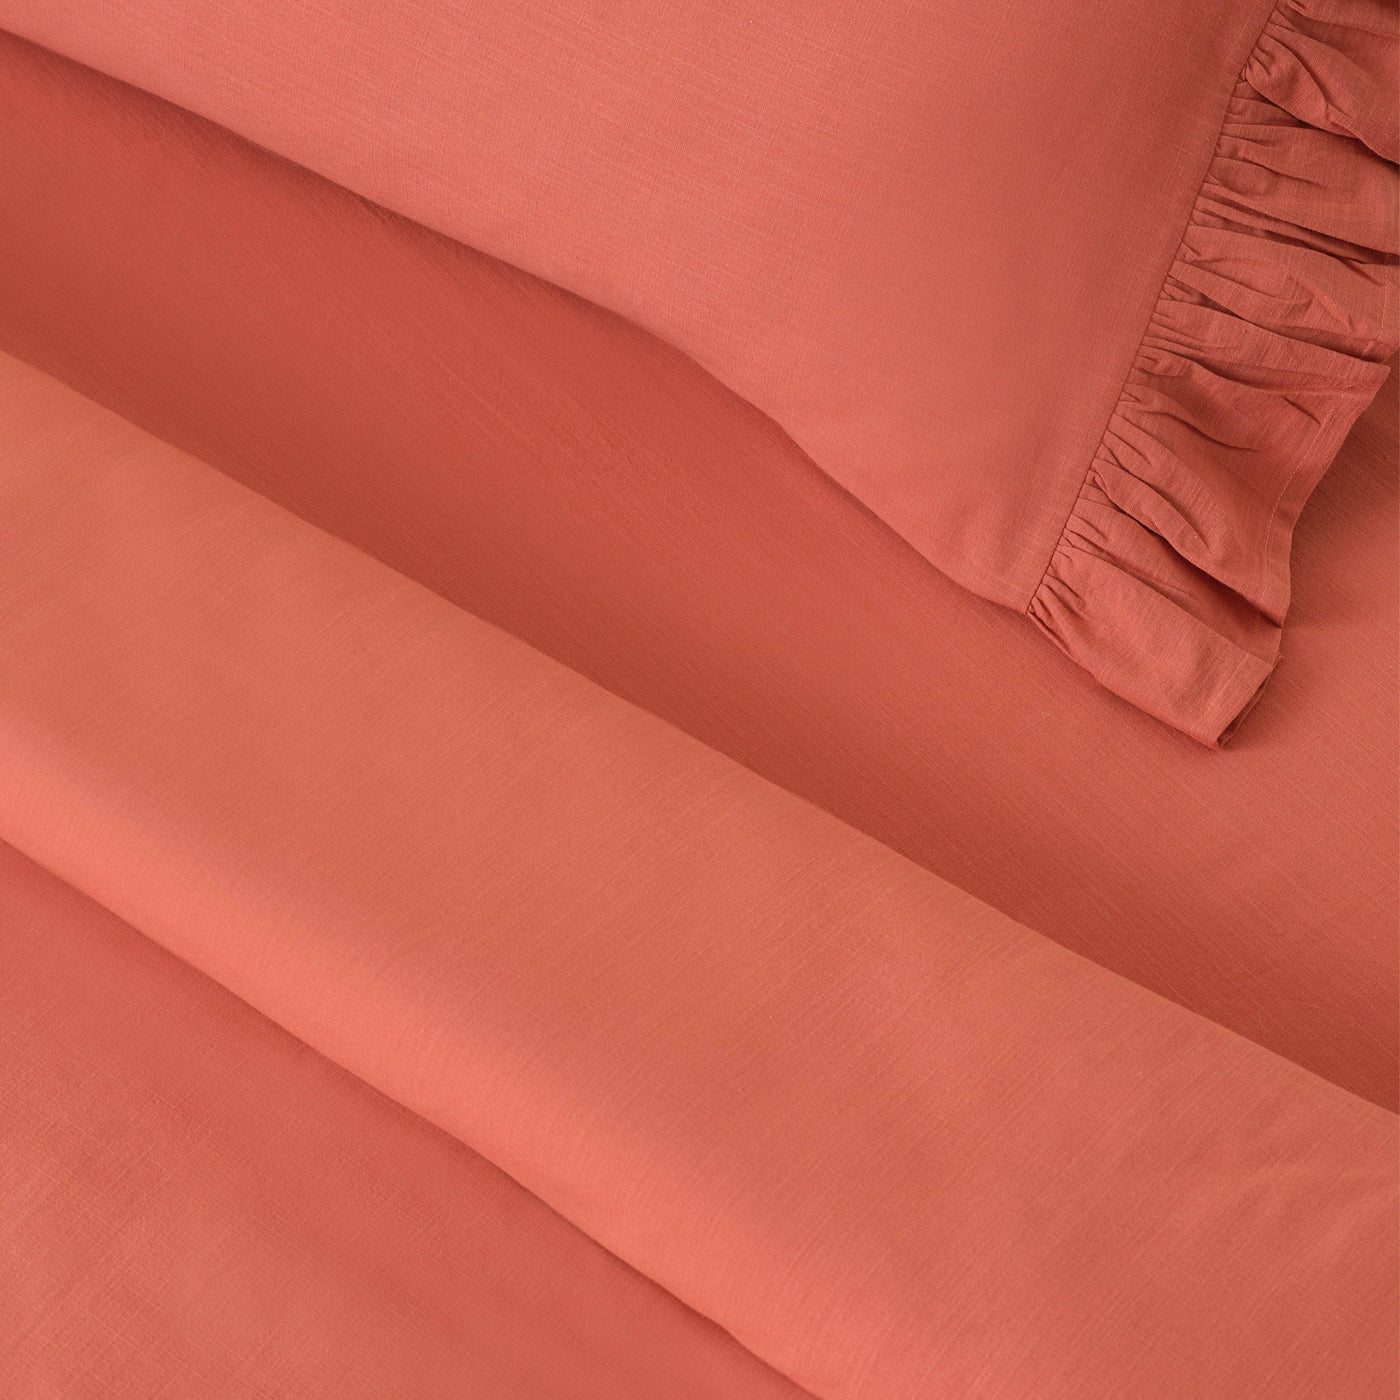 Ruby 100% Turkish Cotton Fitted Sheet, Terra, Super King Size Bed Sheets sazy.com